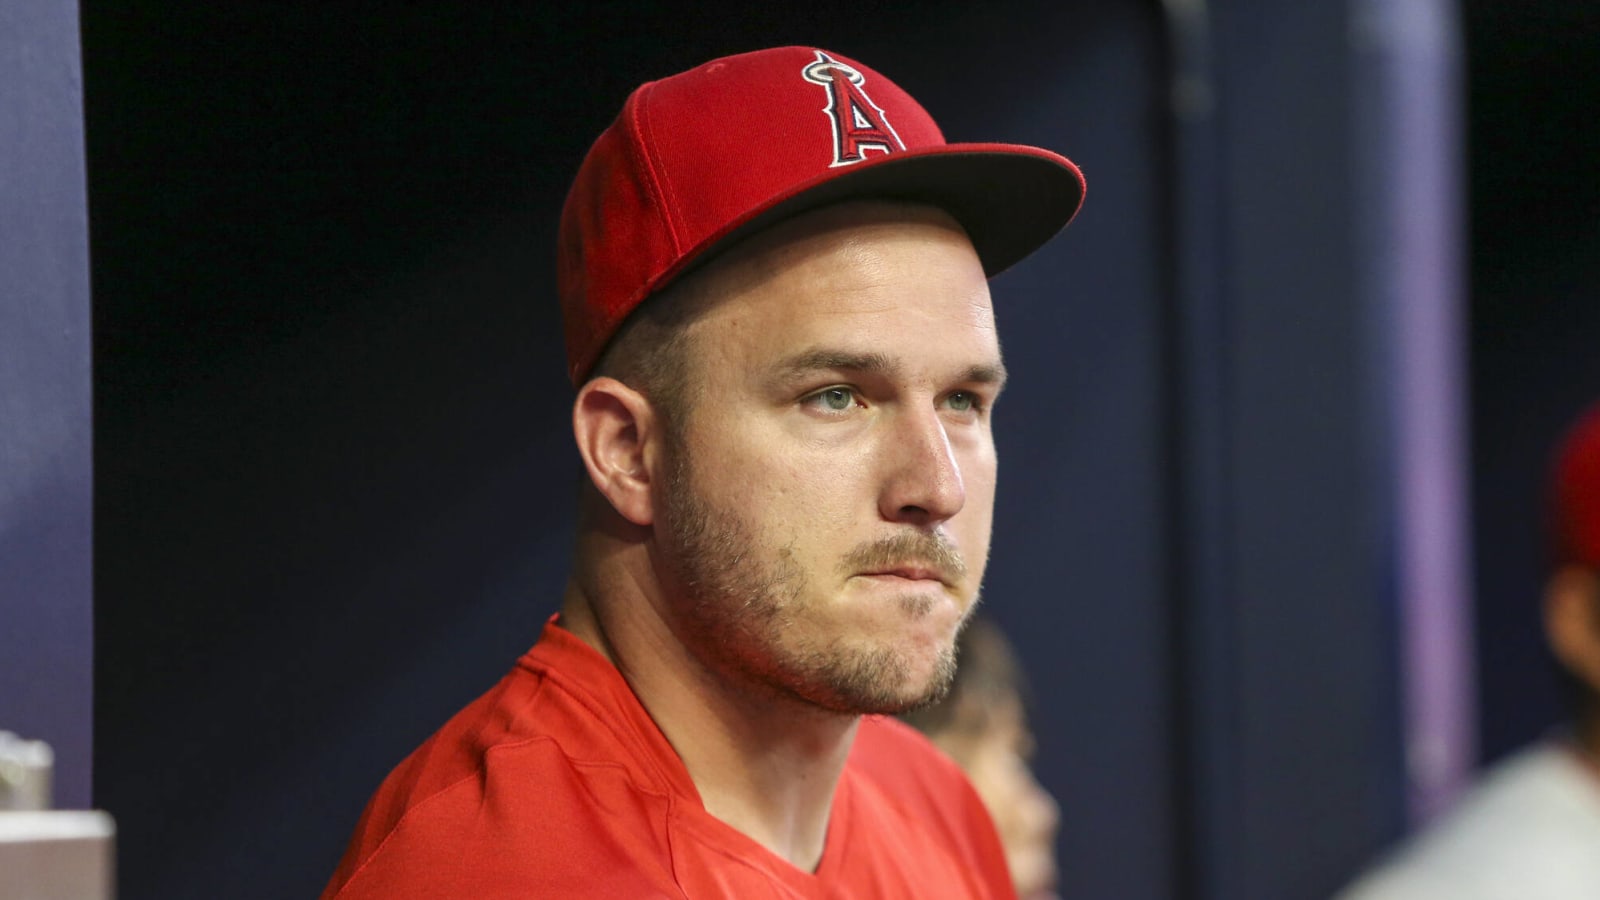 Los Angeles Angels Star Trout Spotted At Philadelphia Eagles and